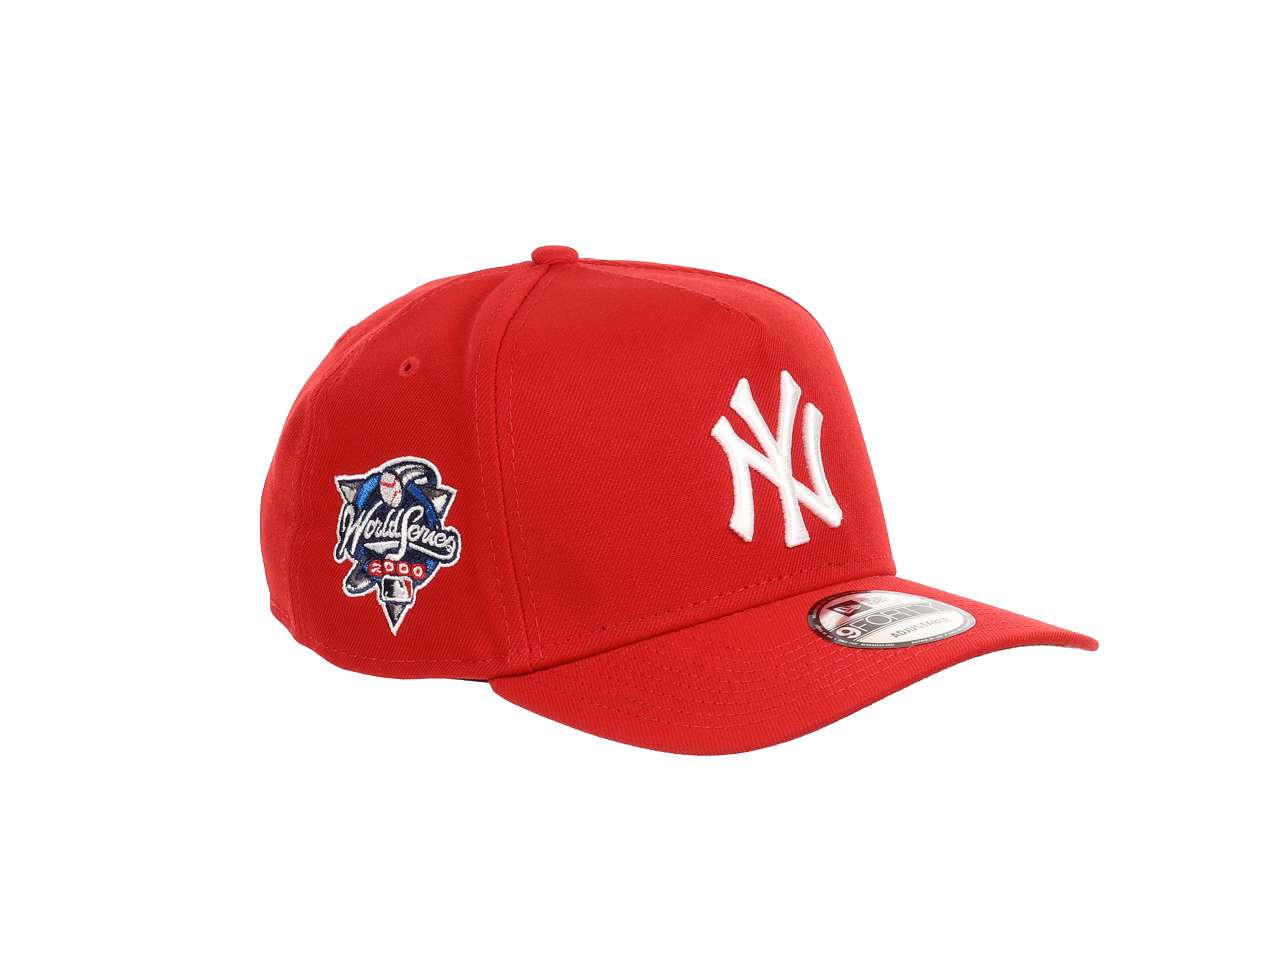 New York Yankees MLB World Series 2000 Sidepatch Red 9Forty A-Frame Snapback Cap New Era